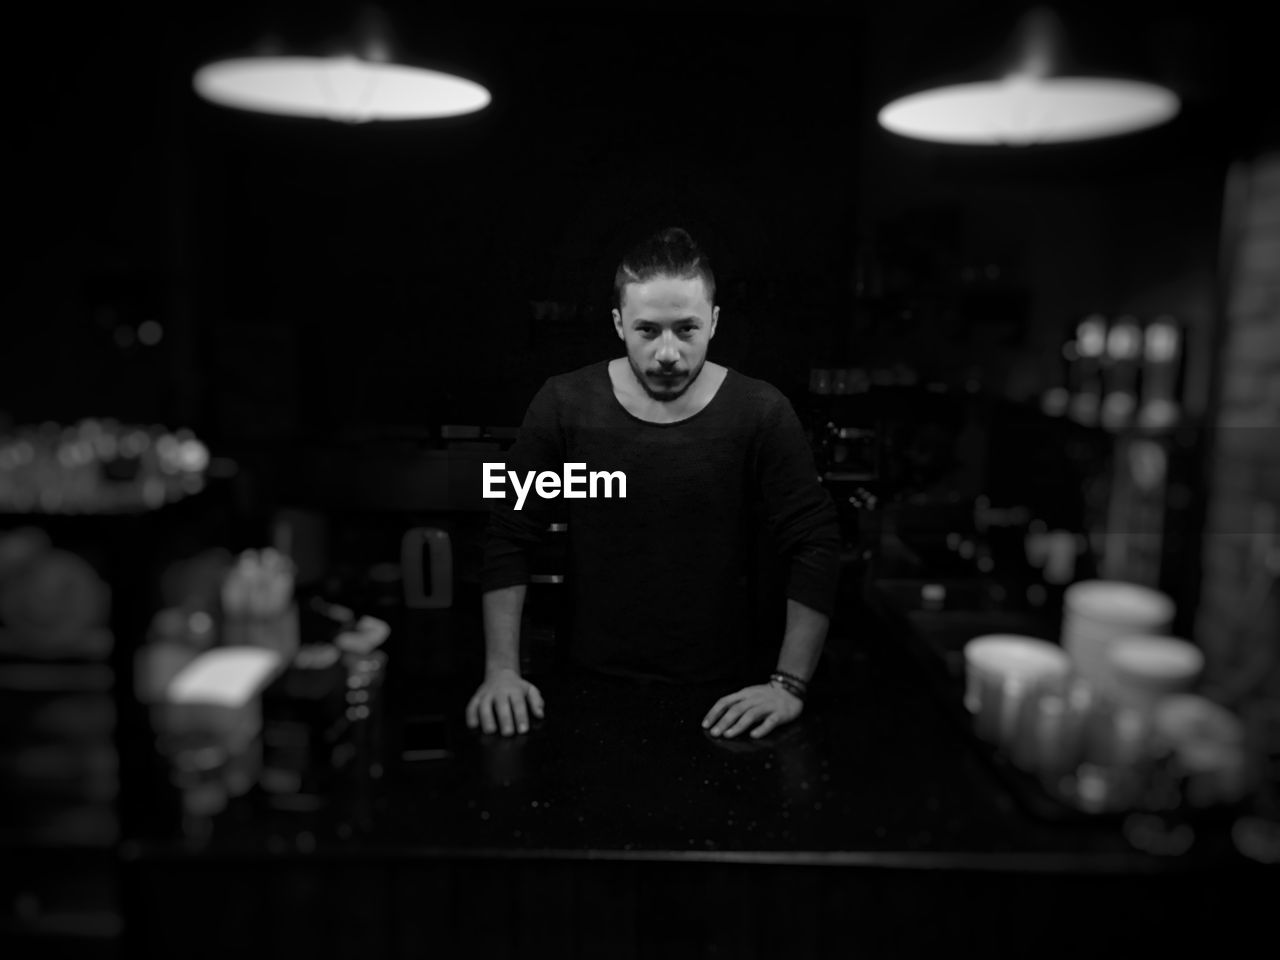 Portrait of man standing at bar counter